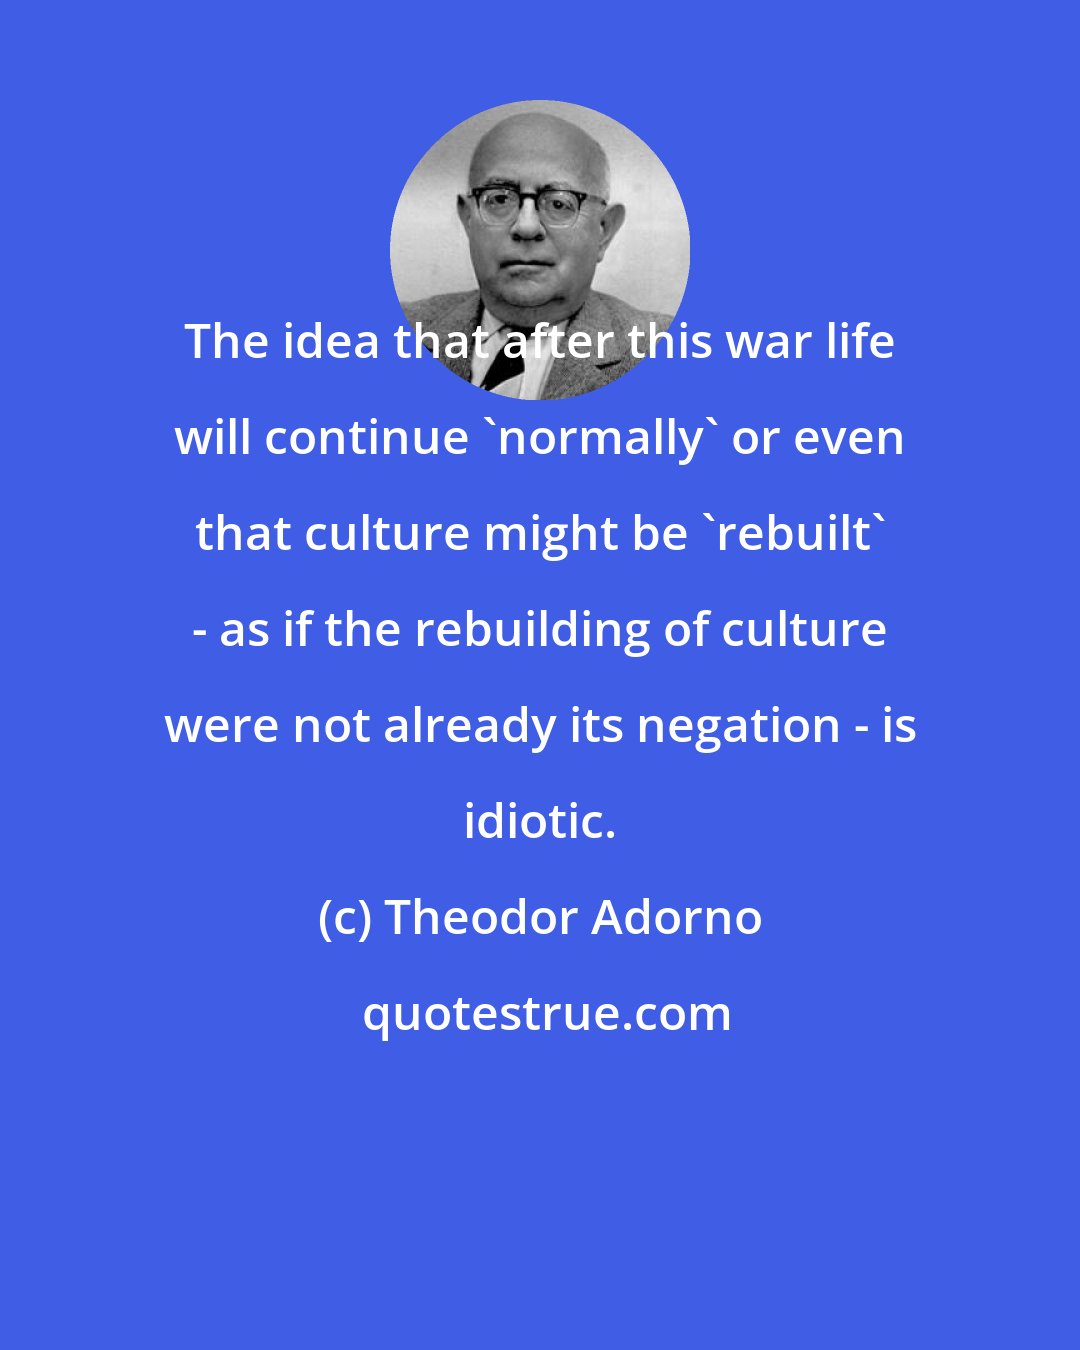 Theodor Adorno: The idea that after this war life will continue 'normally' or even that culture might be 'rebuilt' - as if the rebuilding of culture were not already its negation - is idiotic.